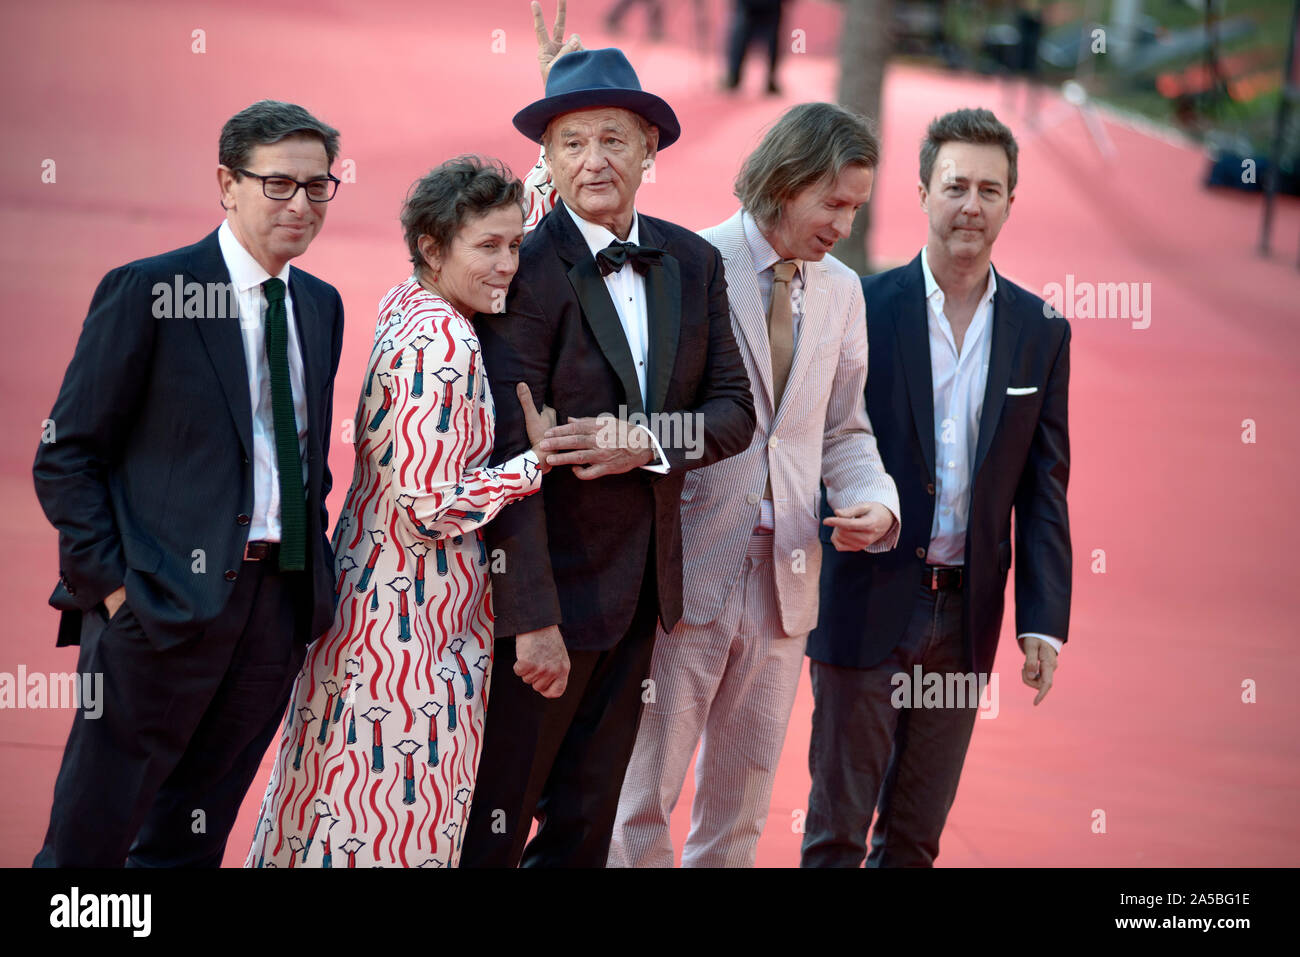 Bill Murray attending the red carpet during the Rome Film Fest 2019 Stock Photo